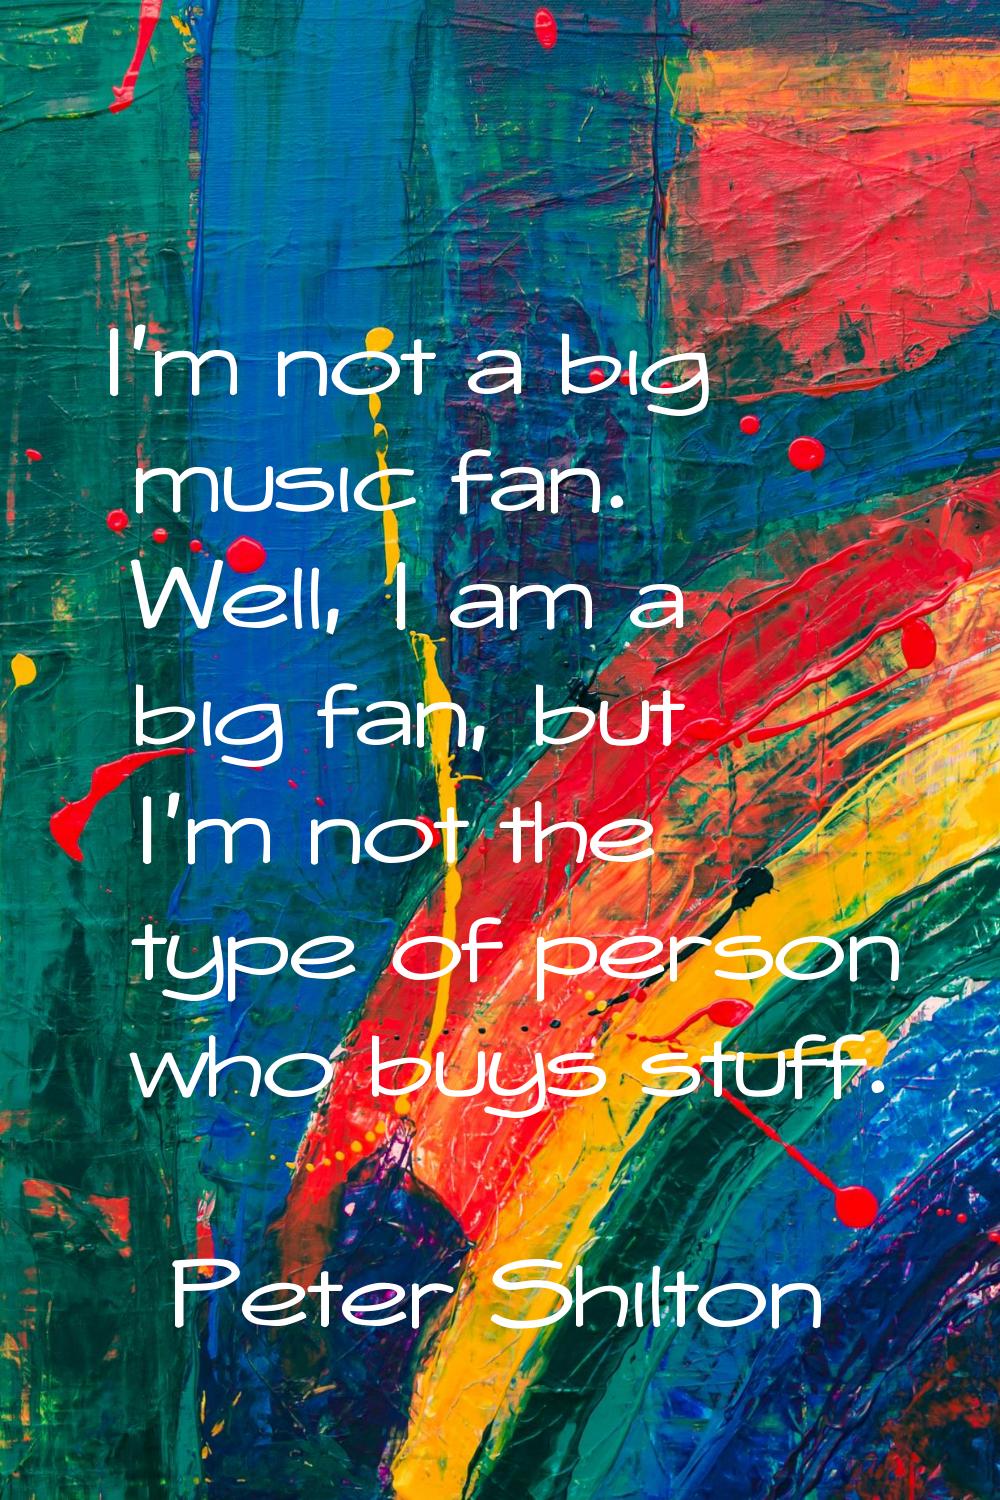 I'm not a big music fan. Well, I am a big fan, but I'm not the type of person who buys stuff.